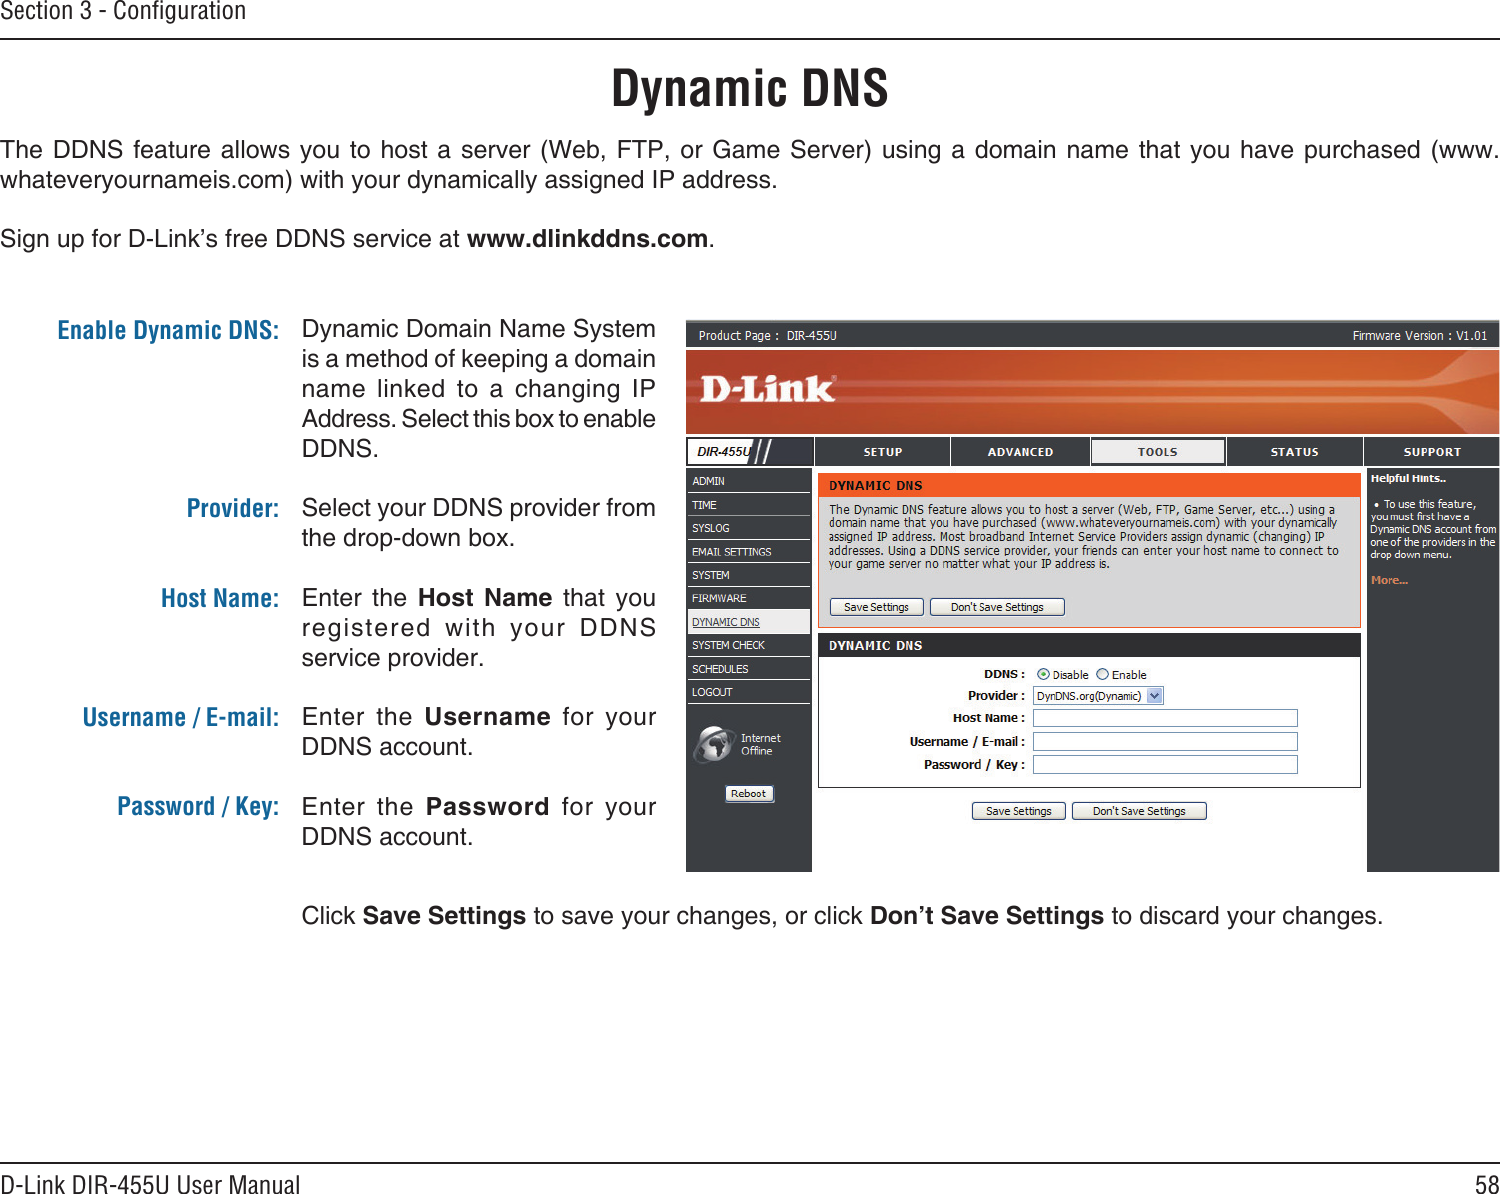 58D-Link DIR-455U User ManualSection 3 - ConﬁgurationDynamic DNSDynamic Domain Name System is a method of keeping a domain name  linked  to  a  changing  IP Address. Select this box to enable DDNS.Select your DDNS provider from the drop-down box.Enter  the  Host  Name  that  you registered  with  your  DDNS service provider.Enter  the  Username  for  your DDNS account.Enter  the  Password  for  your DDNS account.The DDNS feature allows you  to  host a  server (Web,  FTP, or  Game Server)  using  a domain  name that you have purchased (www.whateveryournameis.com) with your dynamically assigned IP address.Sign up for D-Link’s free DDNS service at www.dlinkddns.com.Enable Dynamic DNS:Provider: Host Name:Username / E-mail: Password / Key:Click Save Settings to save your changes, or click Don’t Save Settings to discard your changes.